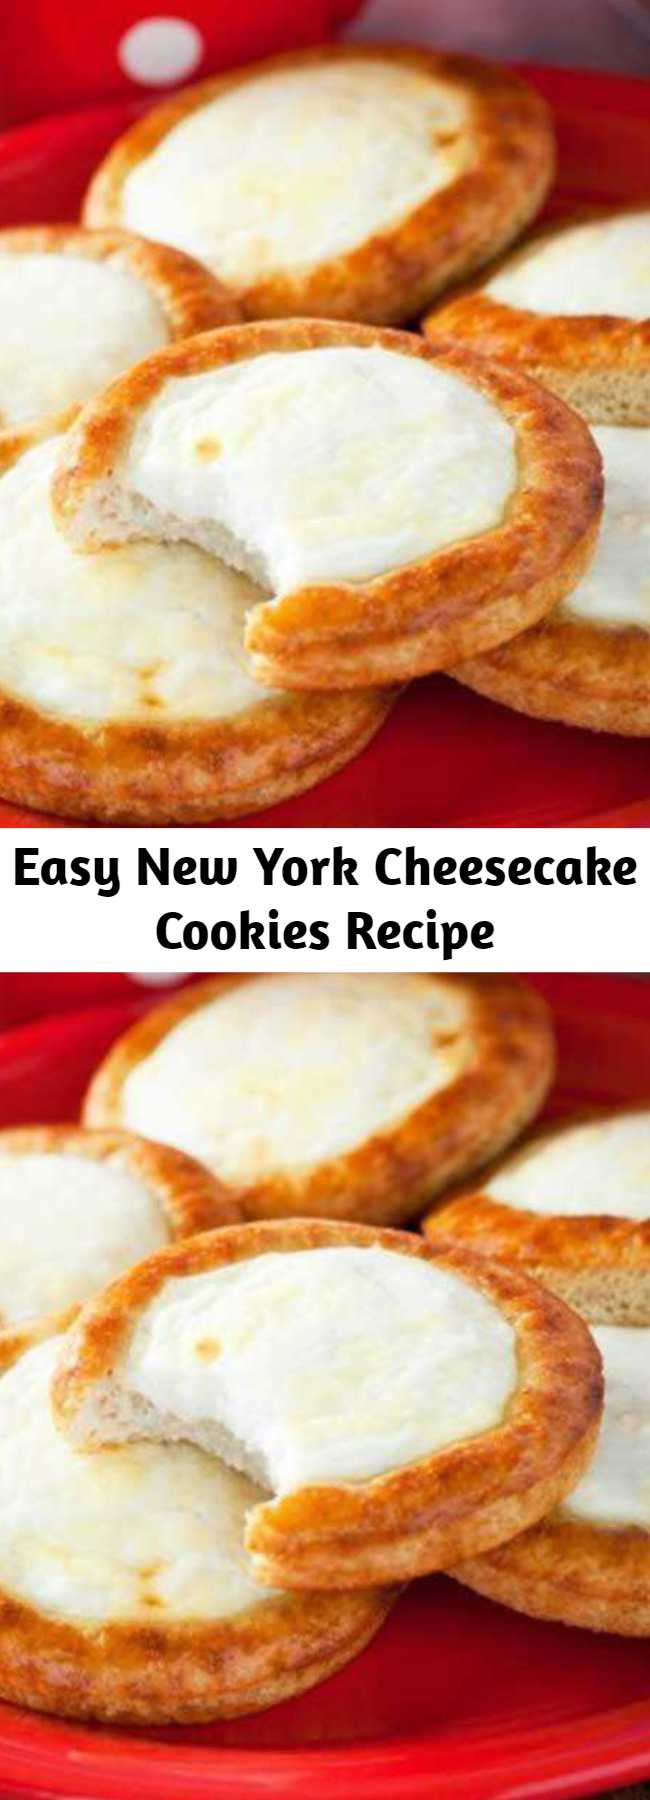 Easy New York Cheesecake Cookies Recipe - What could possibly be better than a slice of New York style cheesecake? How about jamming the whole thing together into cookie form!